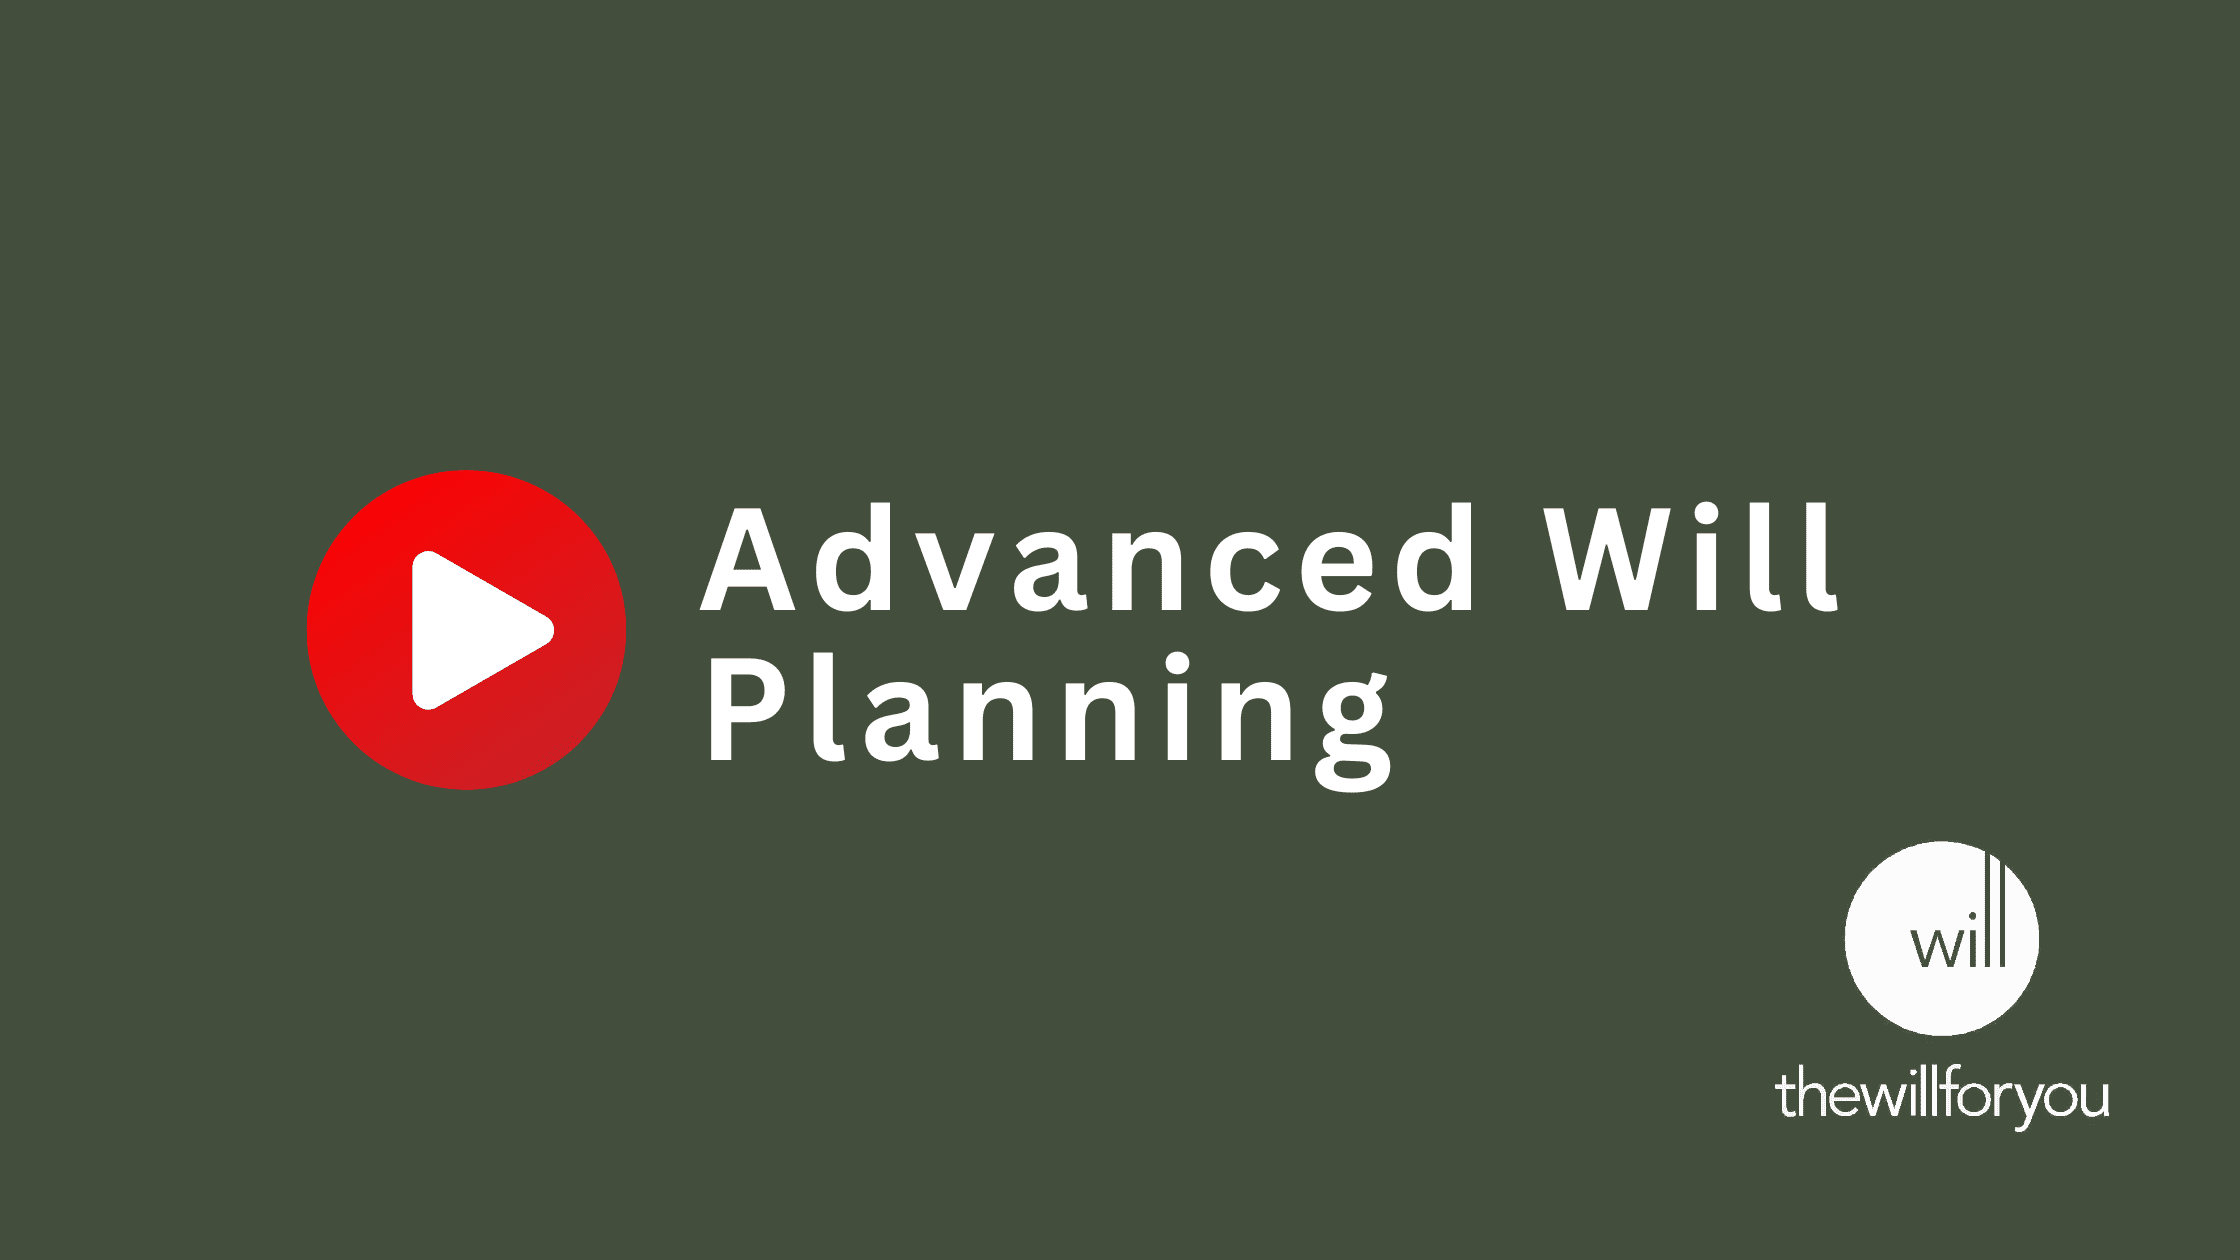 Advanced Will Planning Q&As